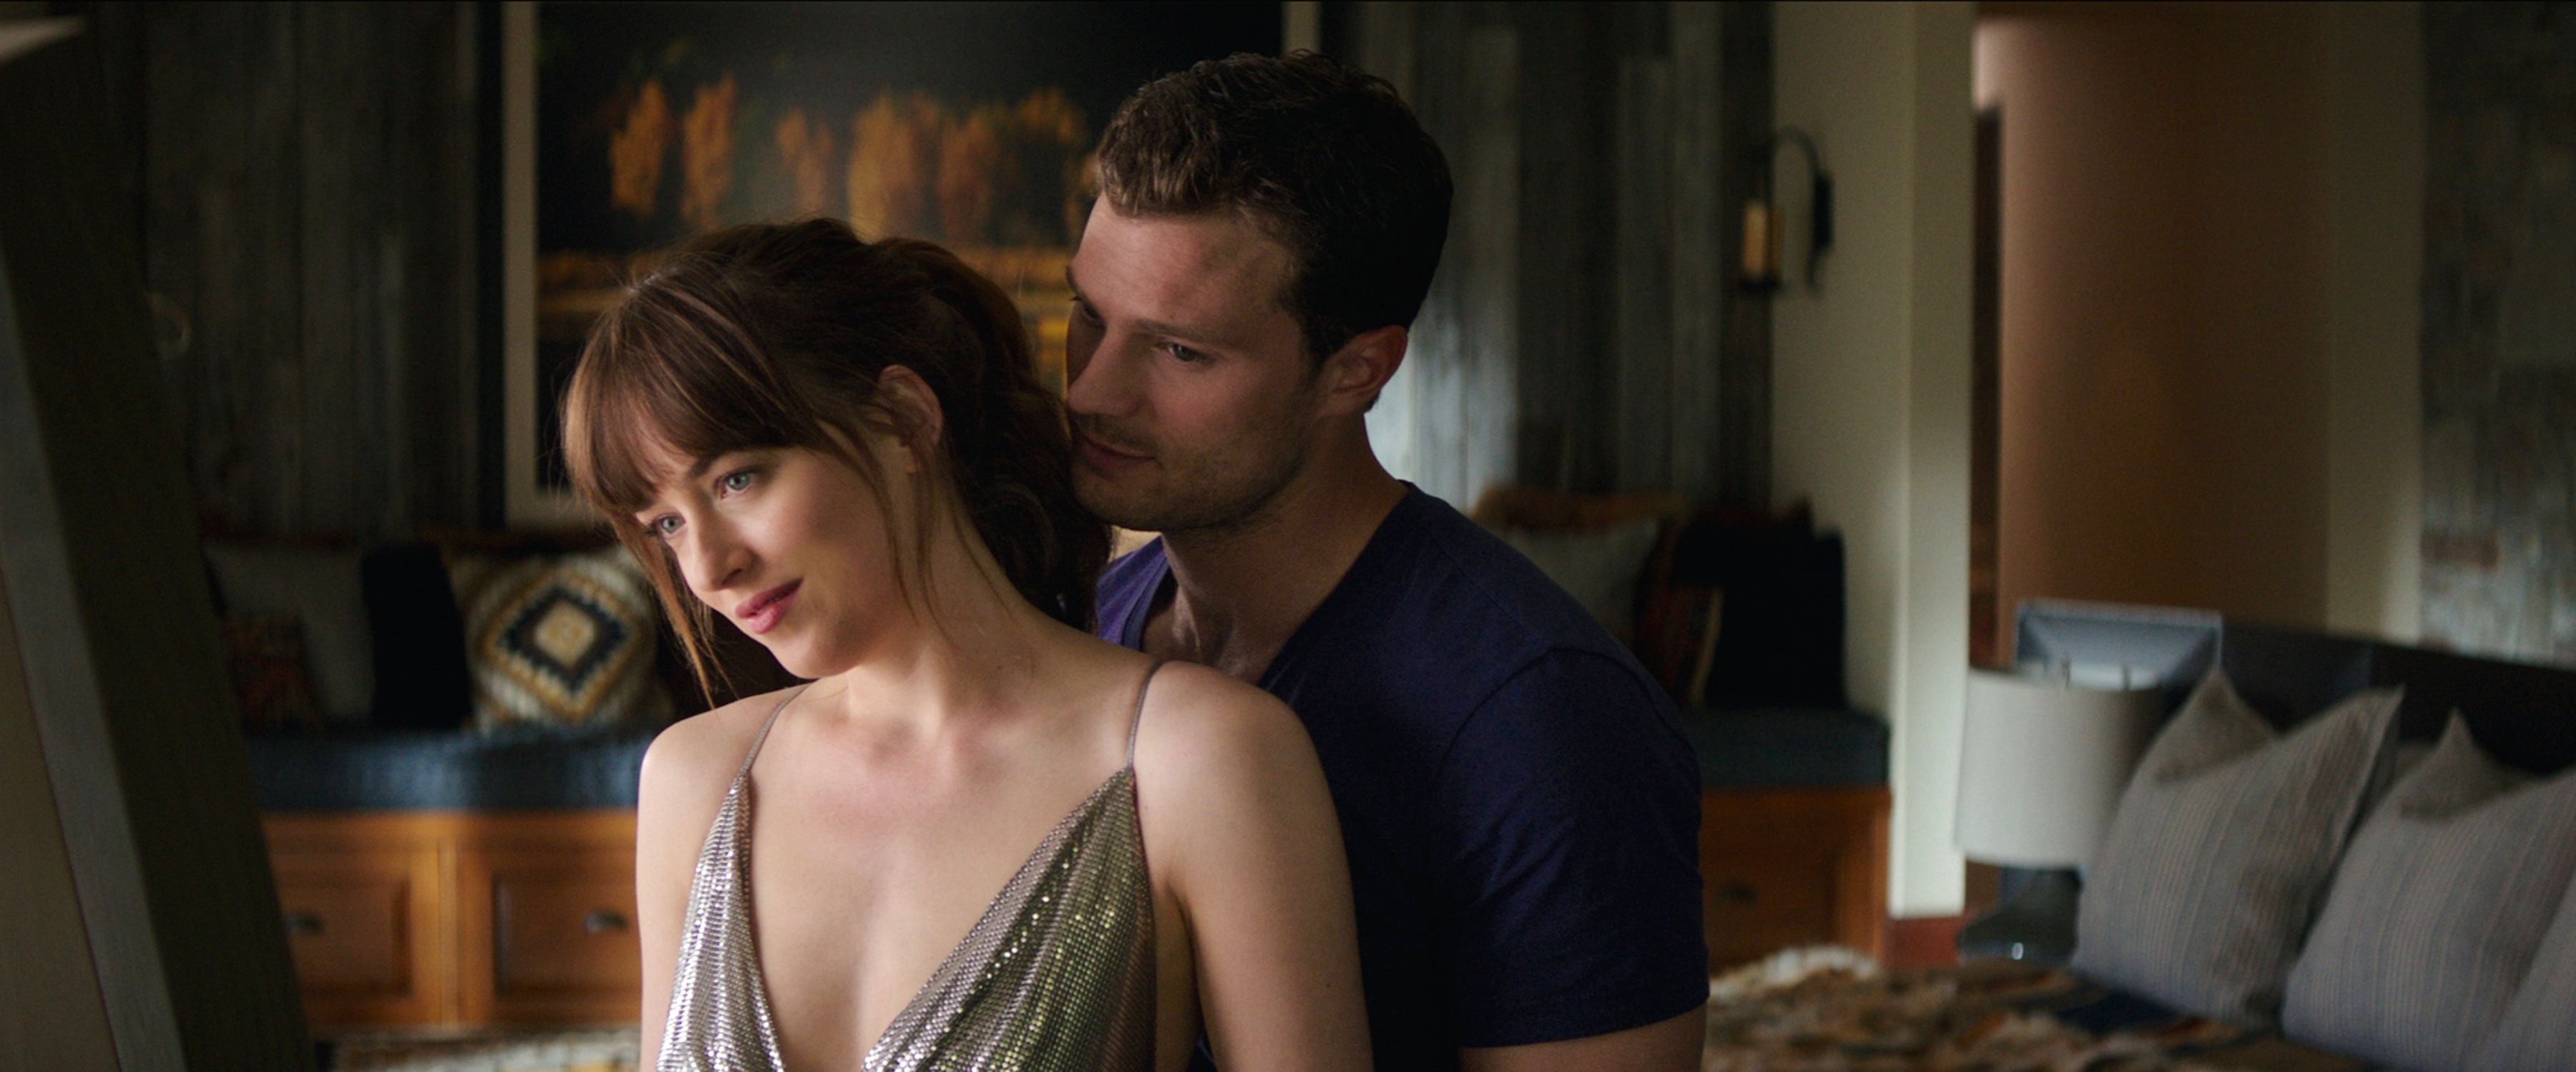 The Sex Scenes in Fifty Shades Freed Are Disappointing picture